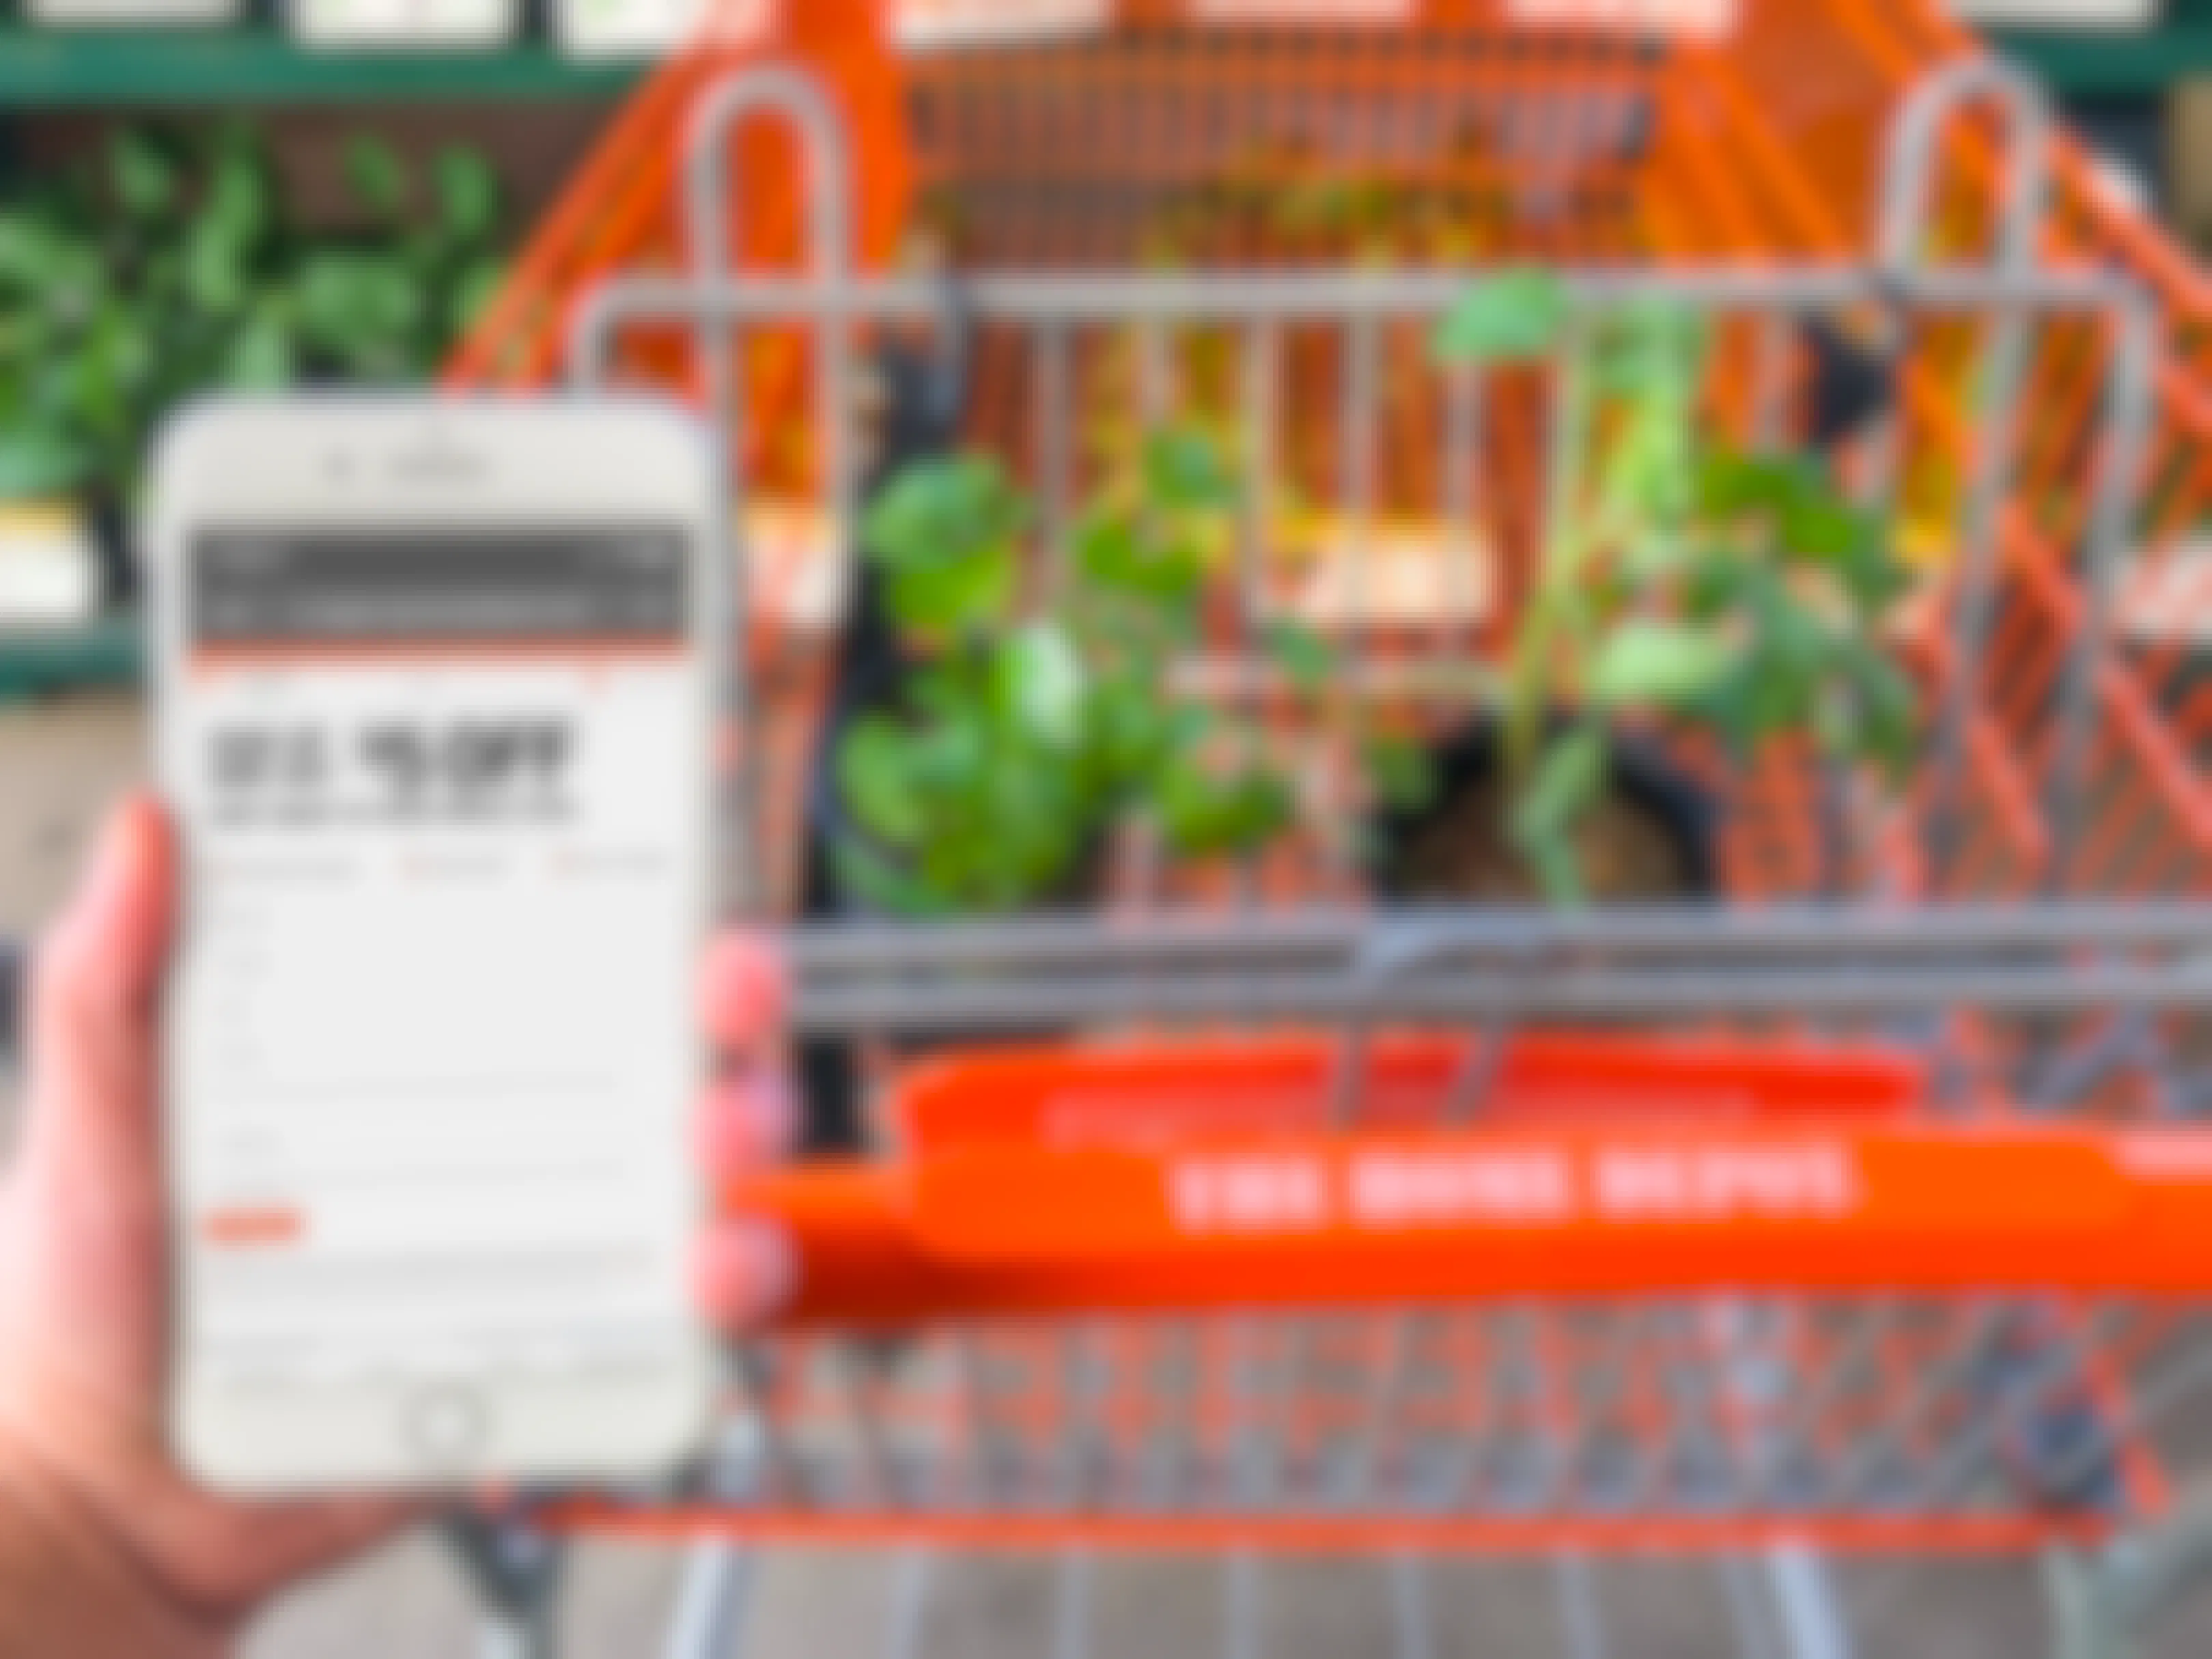 A person's hand holding an iPhone displaying the Home Depot Garden Club sign up page in front of a Home Depot shopping cart.